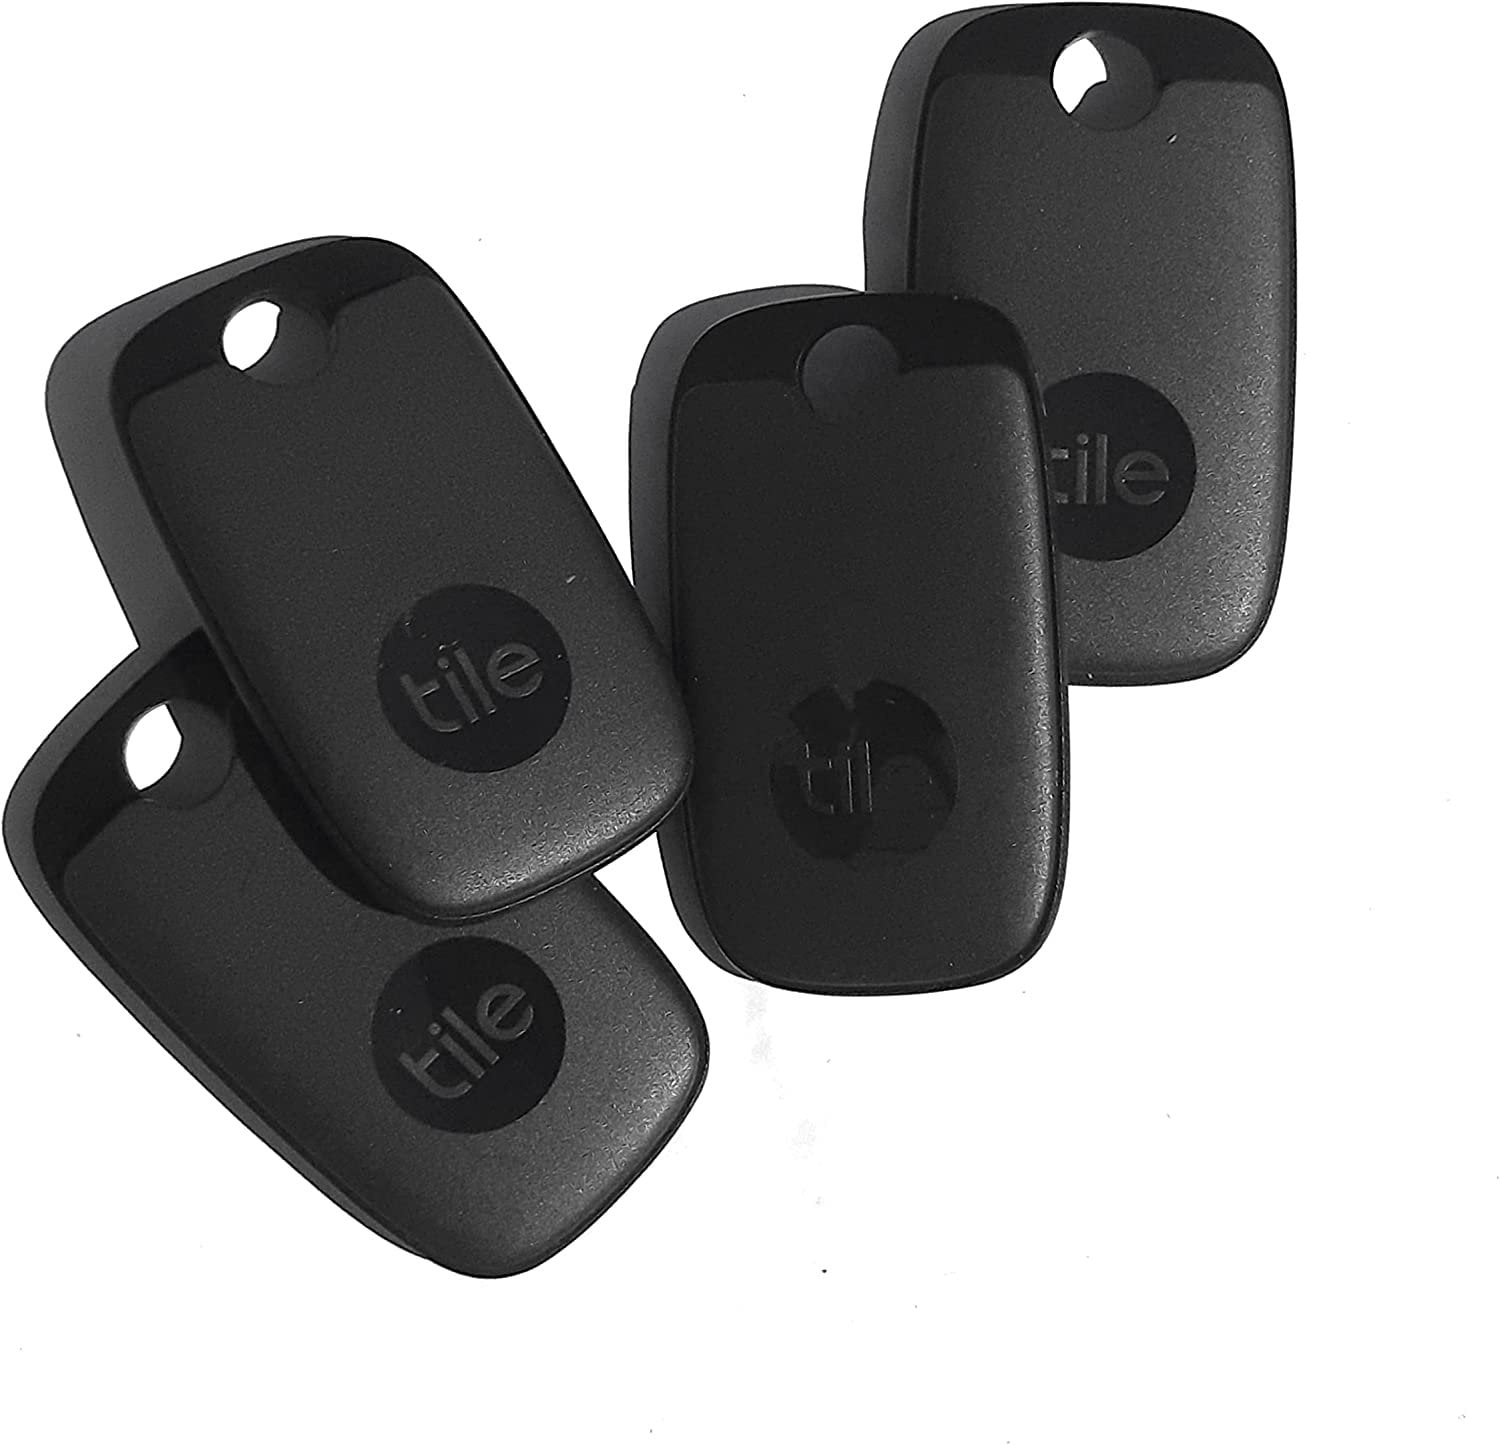 Tile by Life360 Pro (2022) 2 Pack Powerful Bluetooth Tracker, Key Finder  and Item Locator for Keys, Bags, and More; Up to 400 ft Range Black/White  RE-51002 - Best Buy